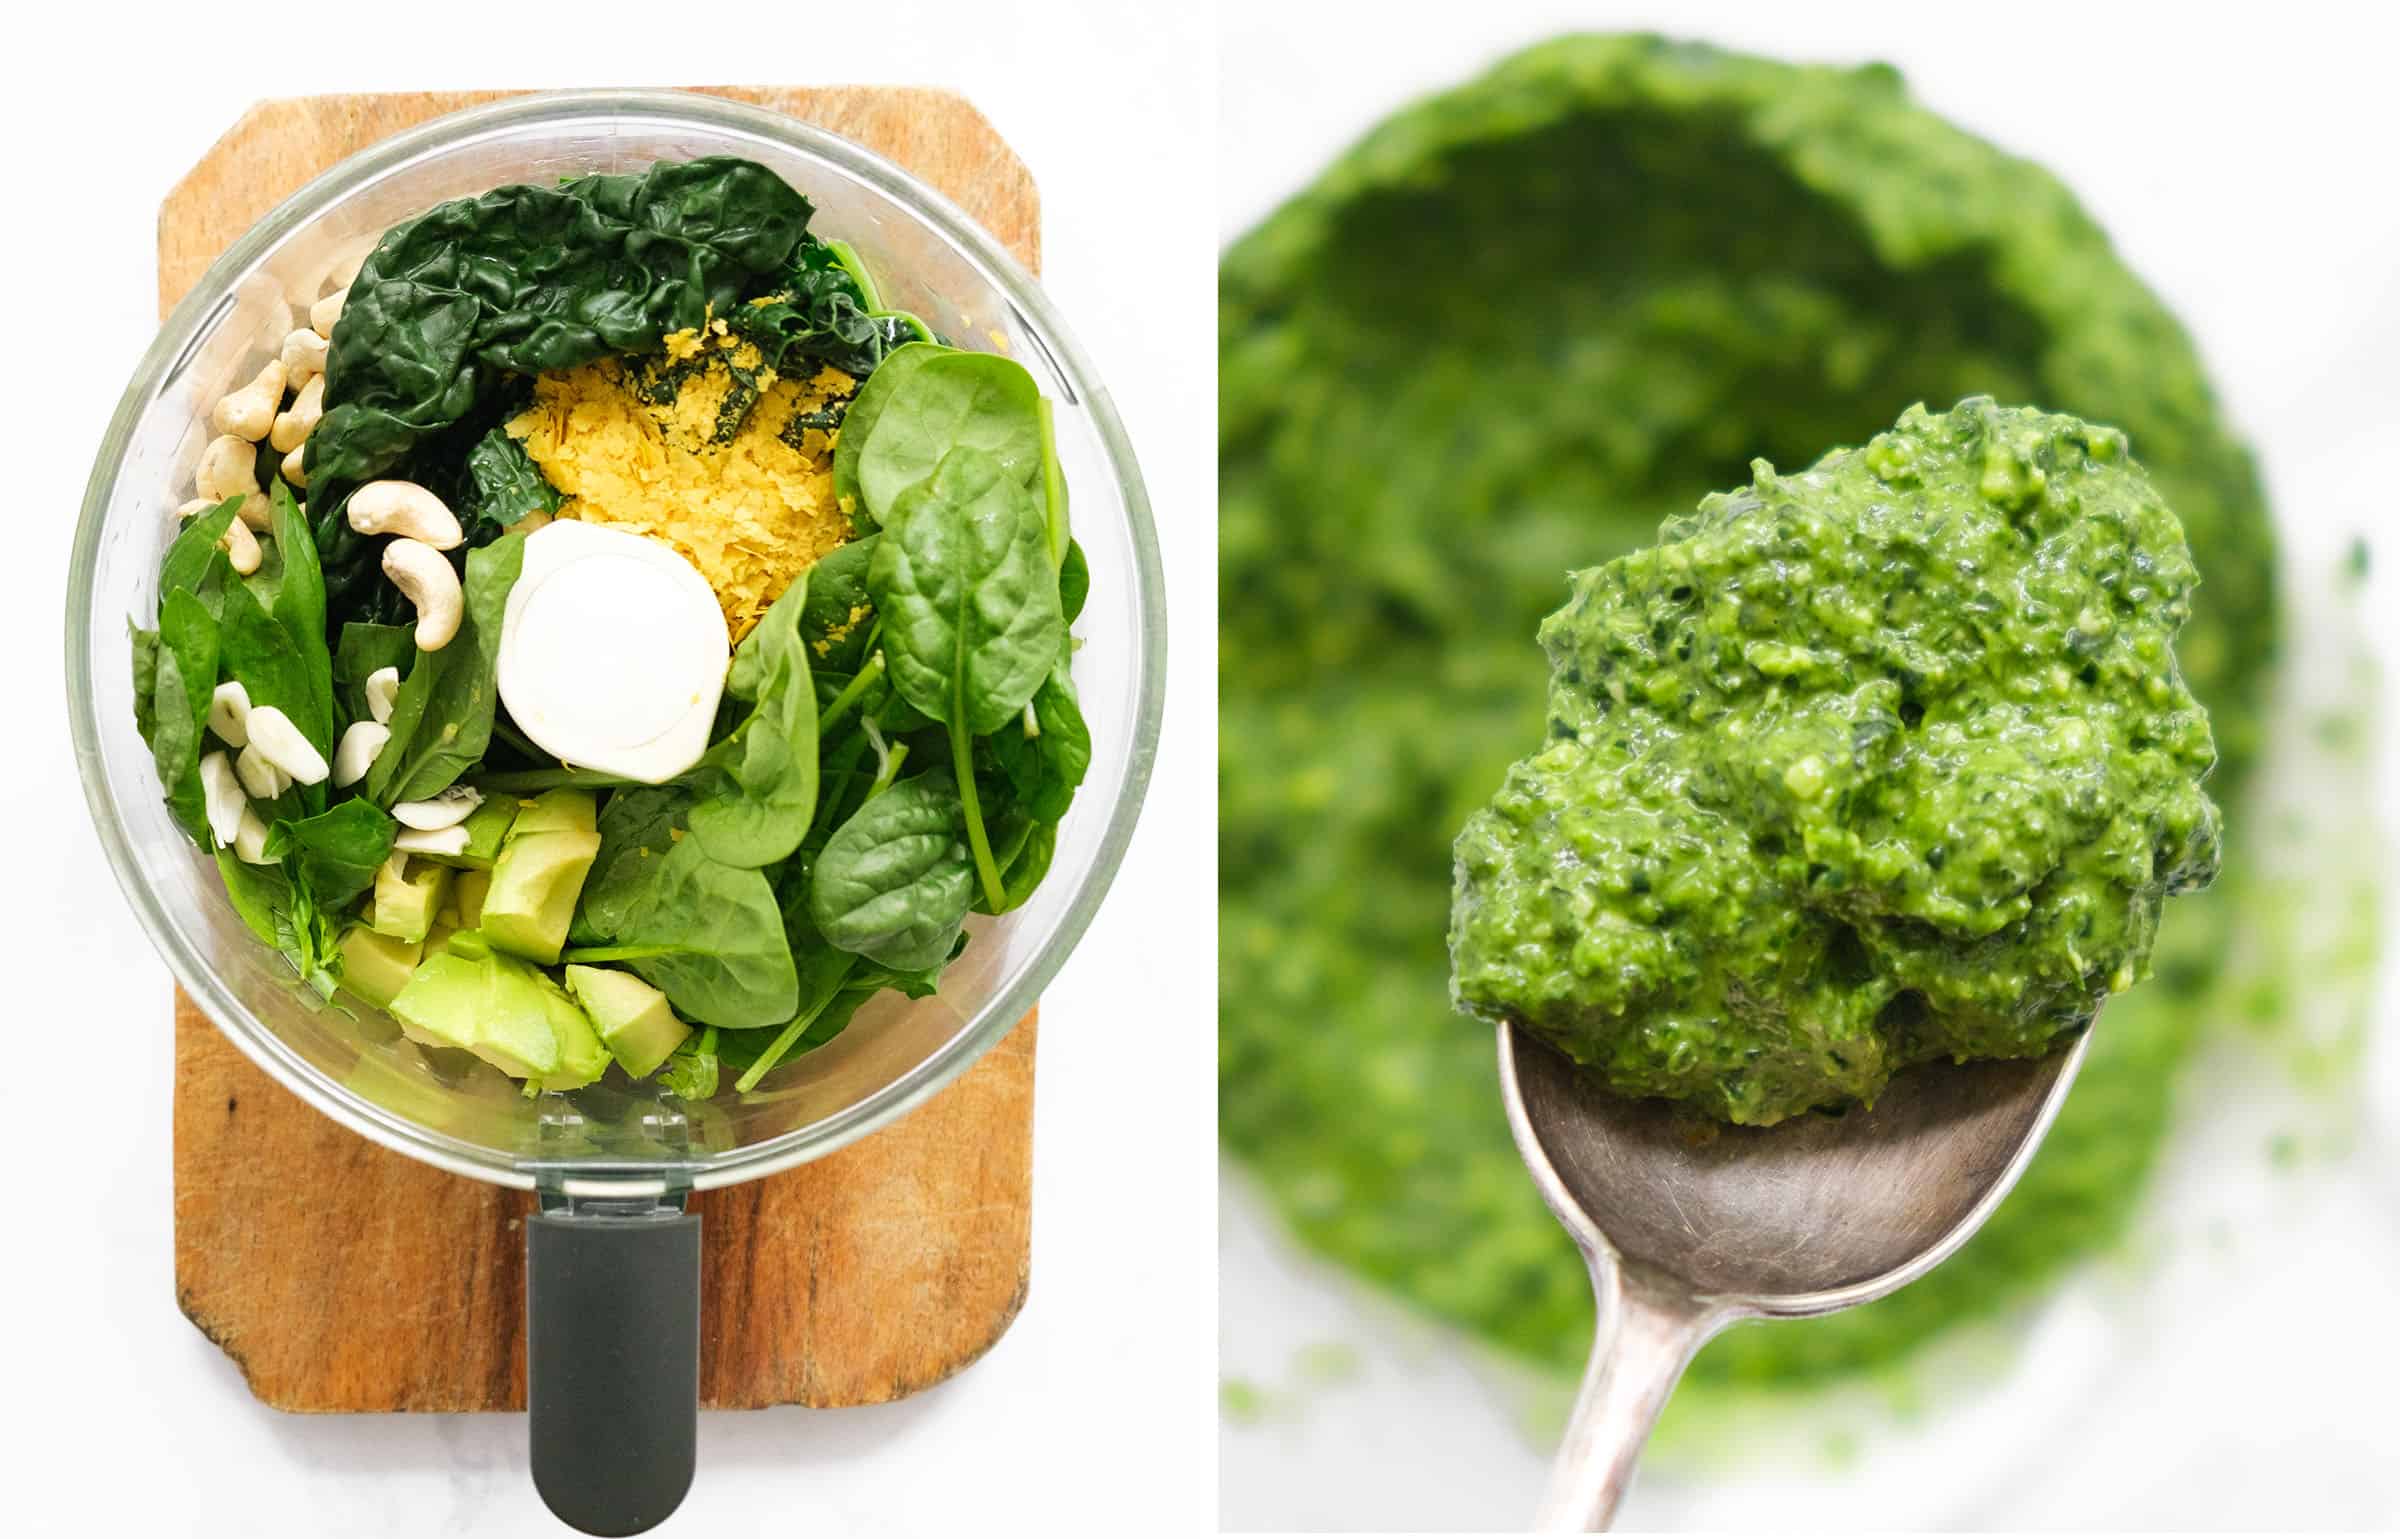 Two images showing a food processor full of the ingredients to make green pesto and a close-up of a spoon full of pesto.